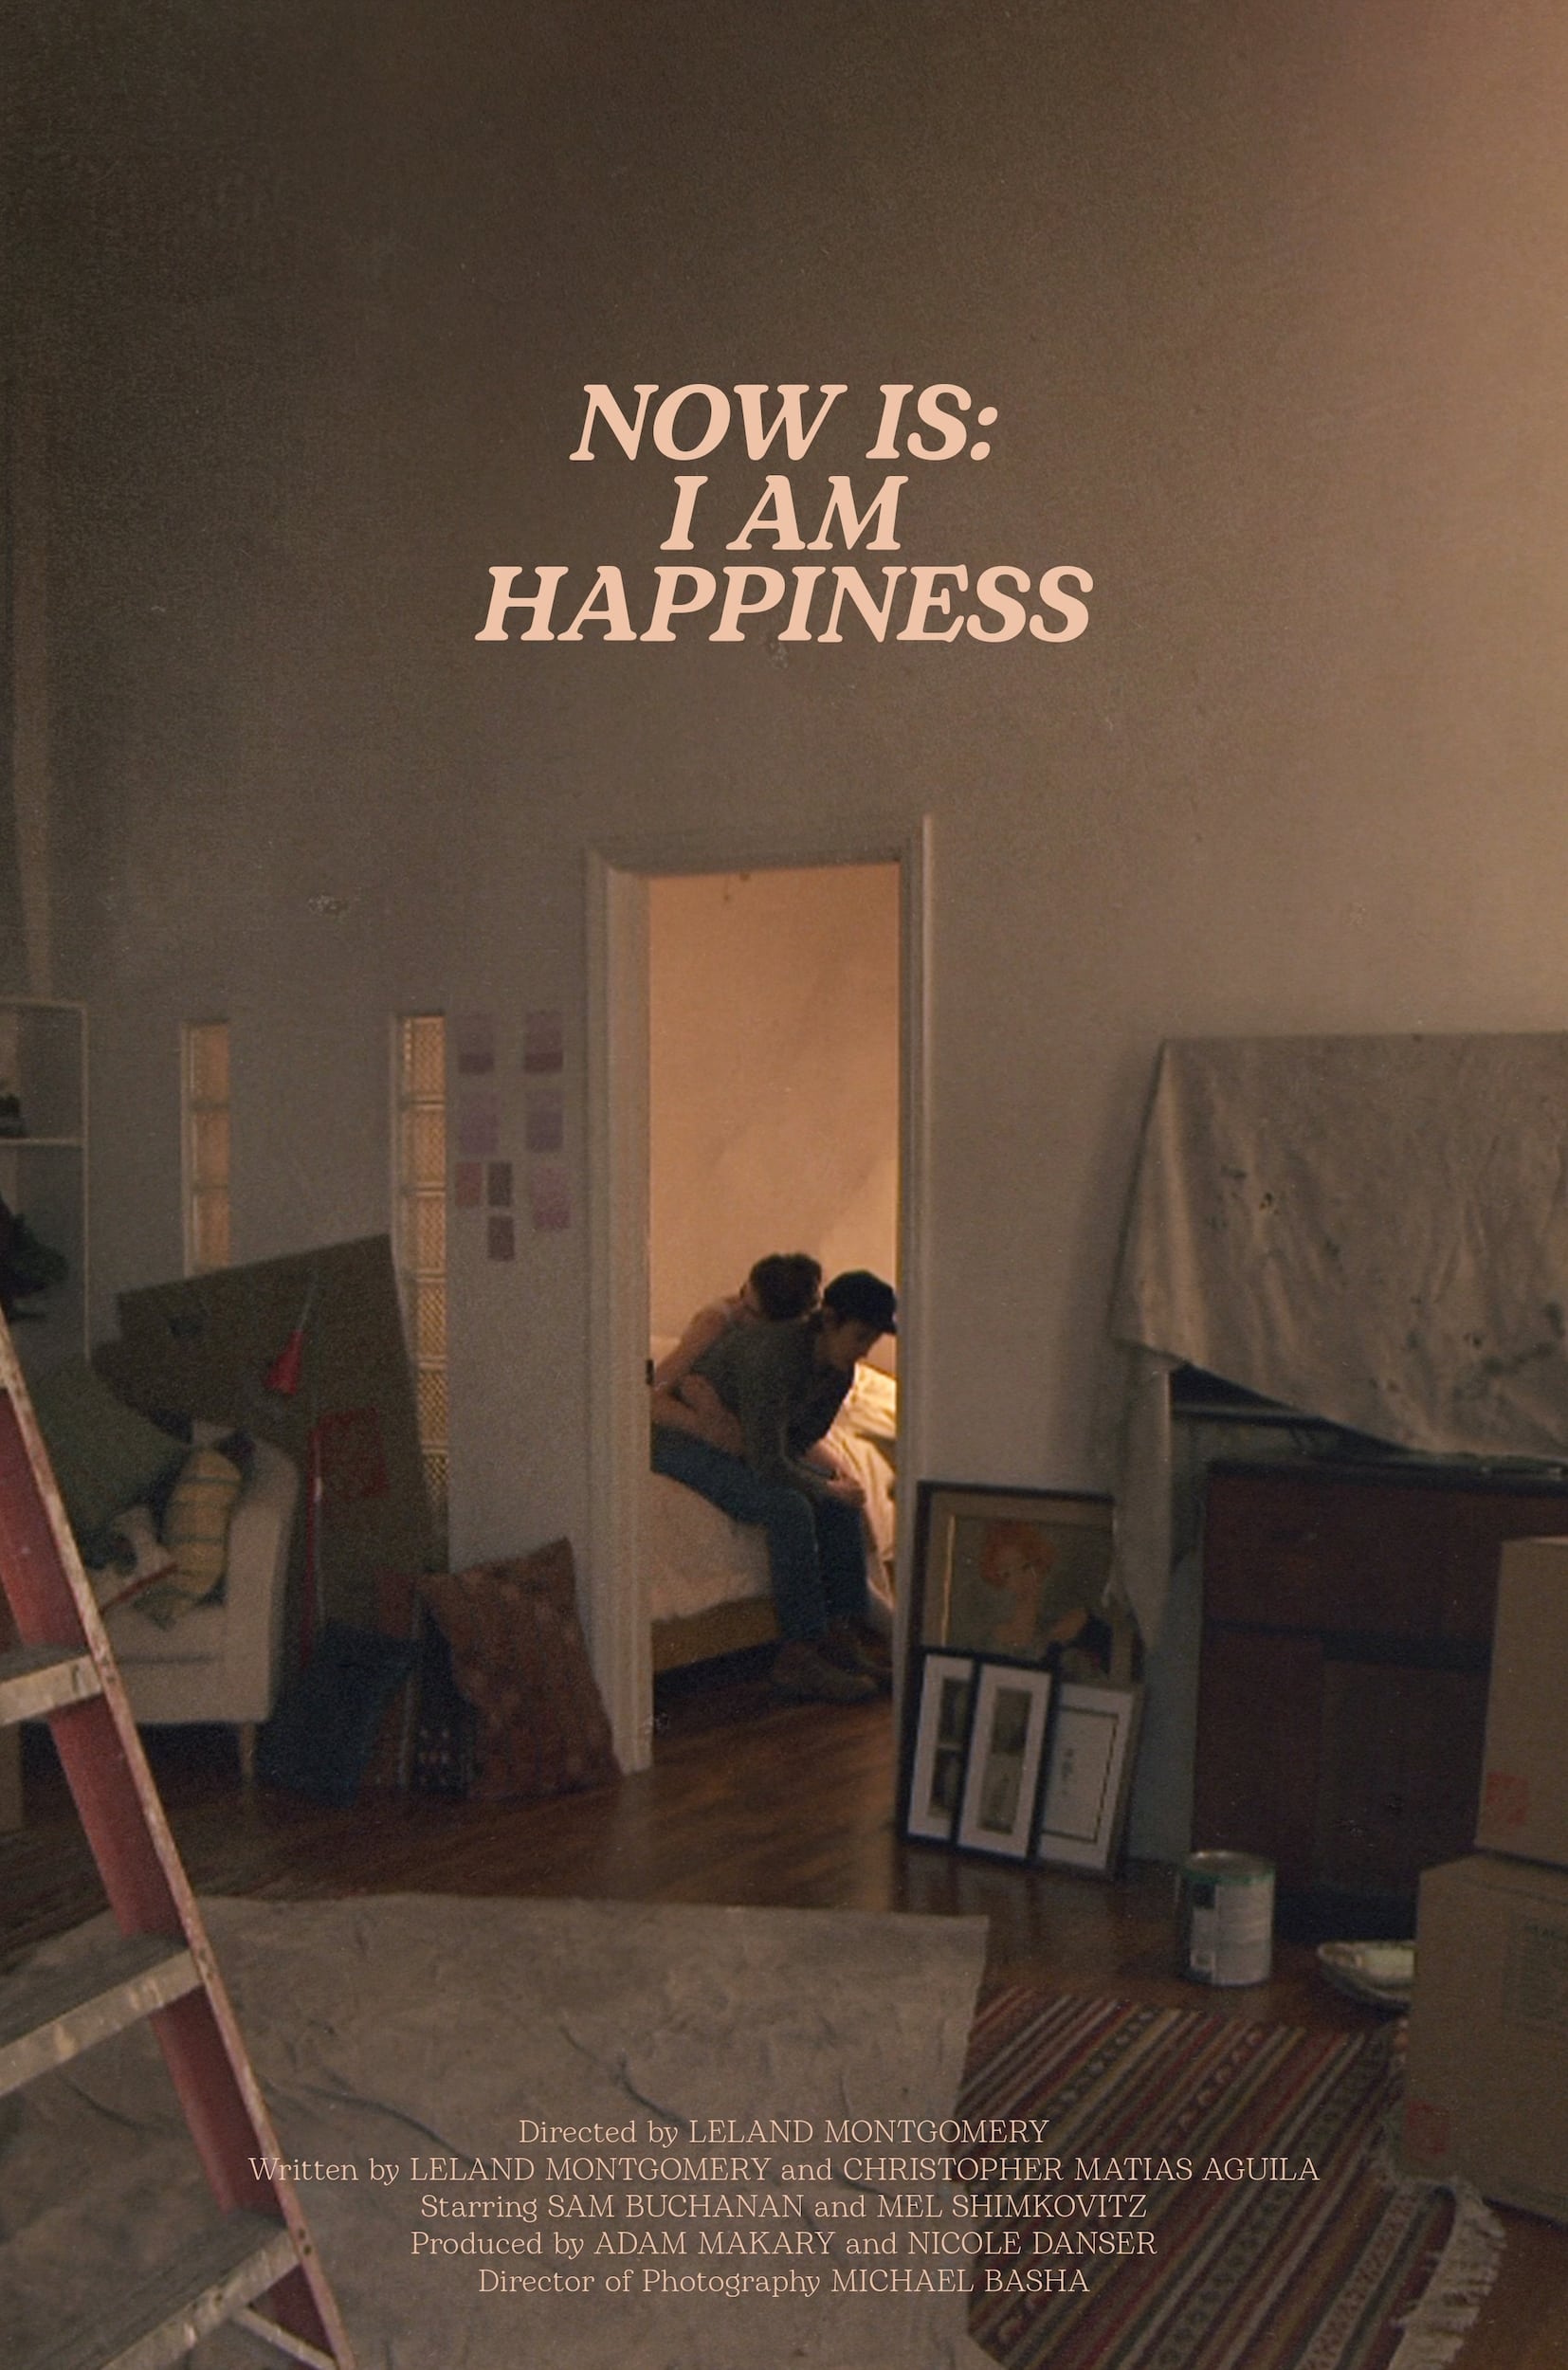 Now Is: I am Happiness